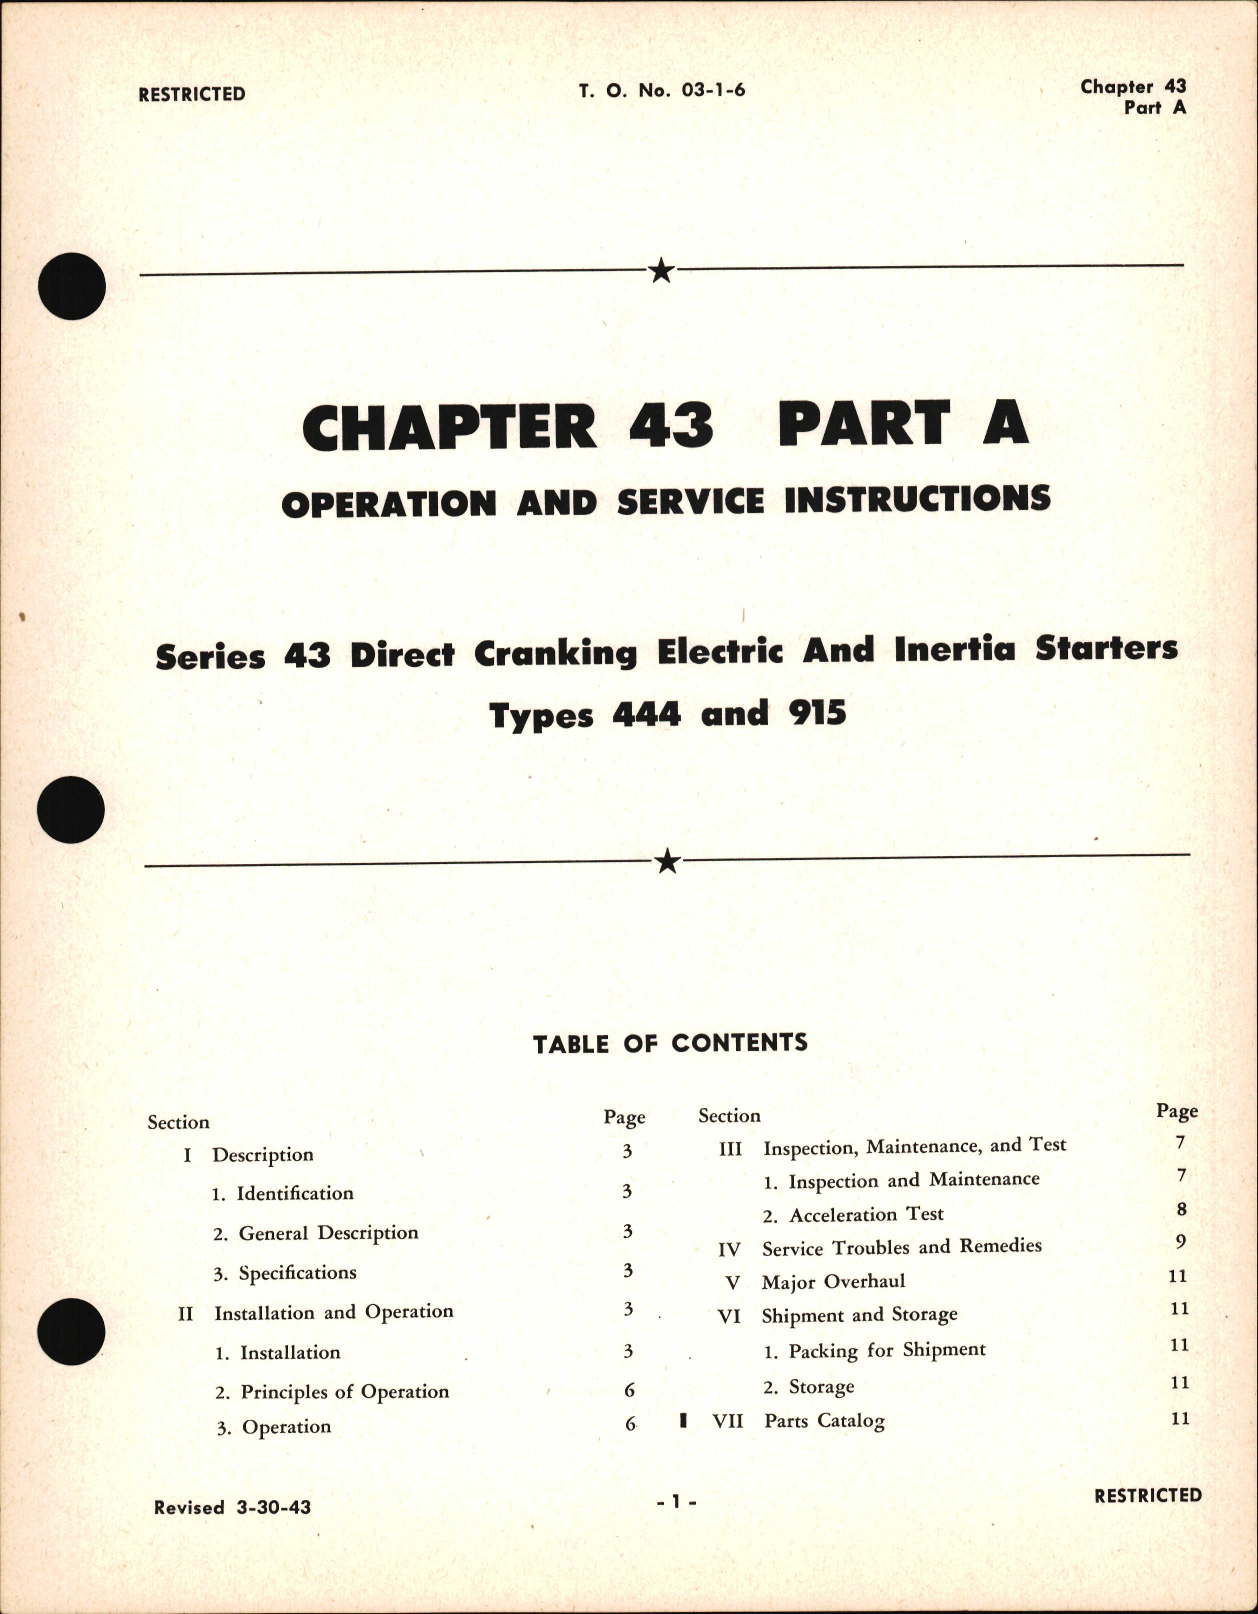 Sample page 1 from AirCorps Library document: Operation & Service Instruction for Direct Cranking Electric and Inertia Starters, Chapter 43 Part A